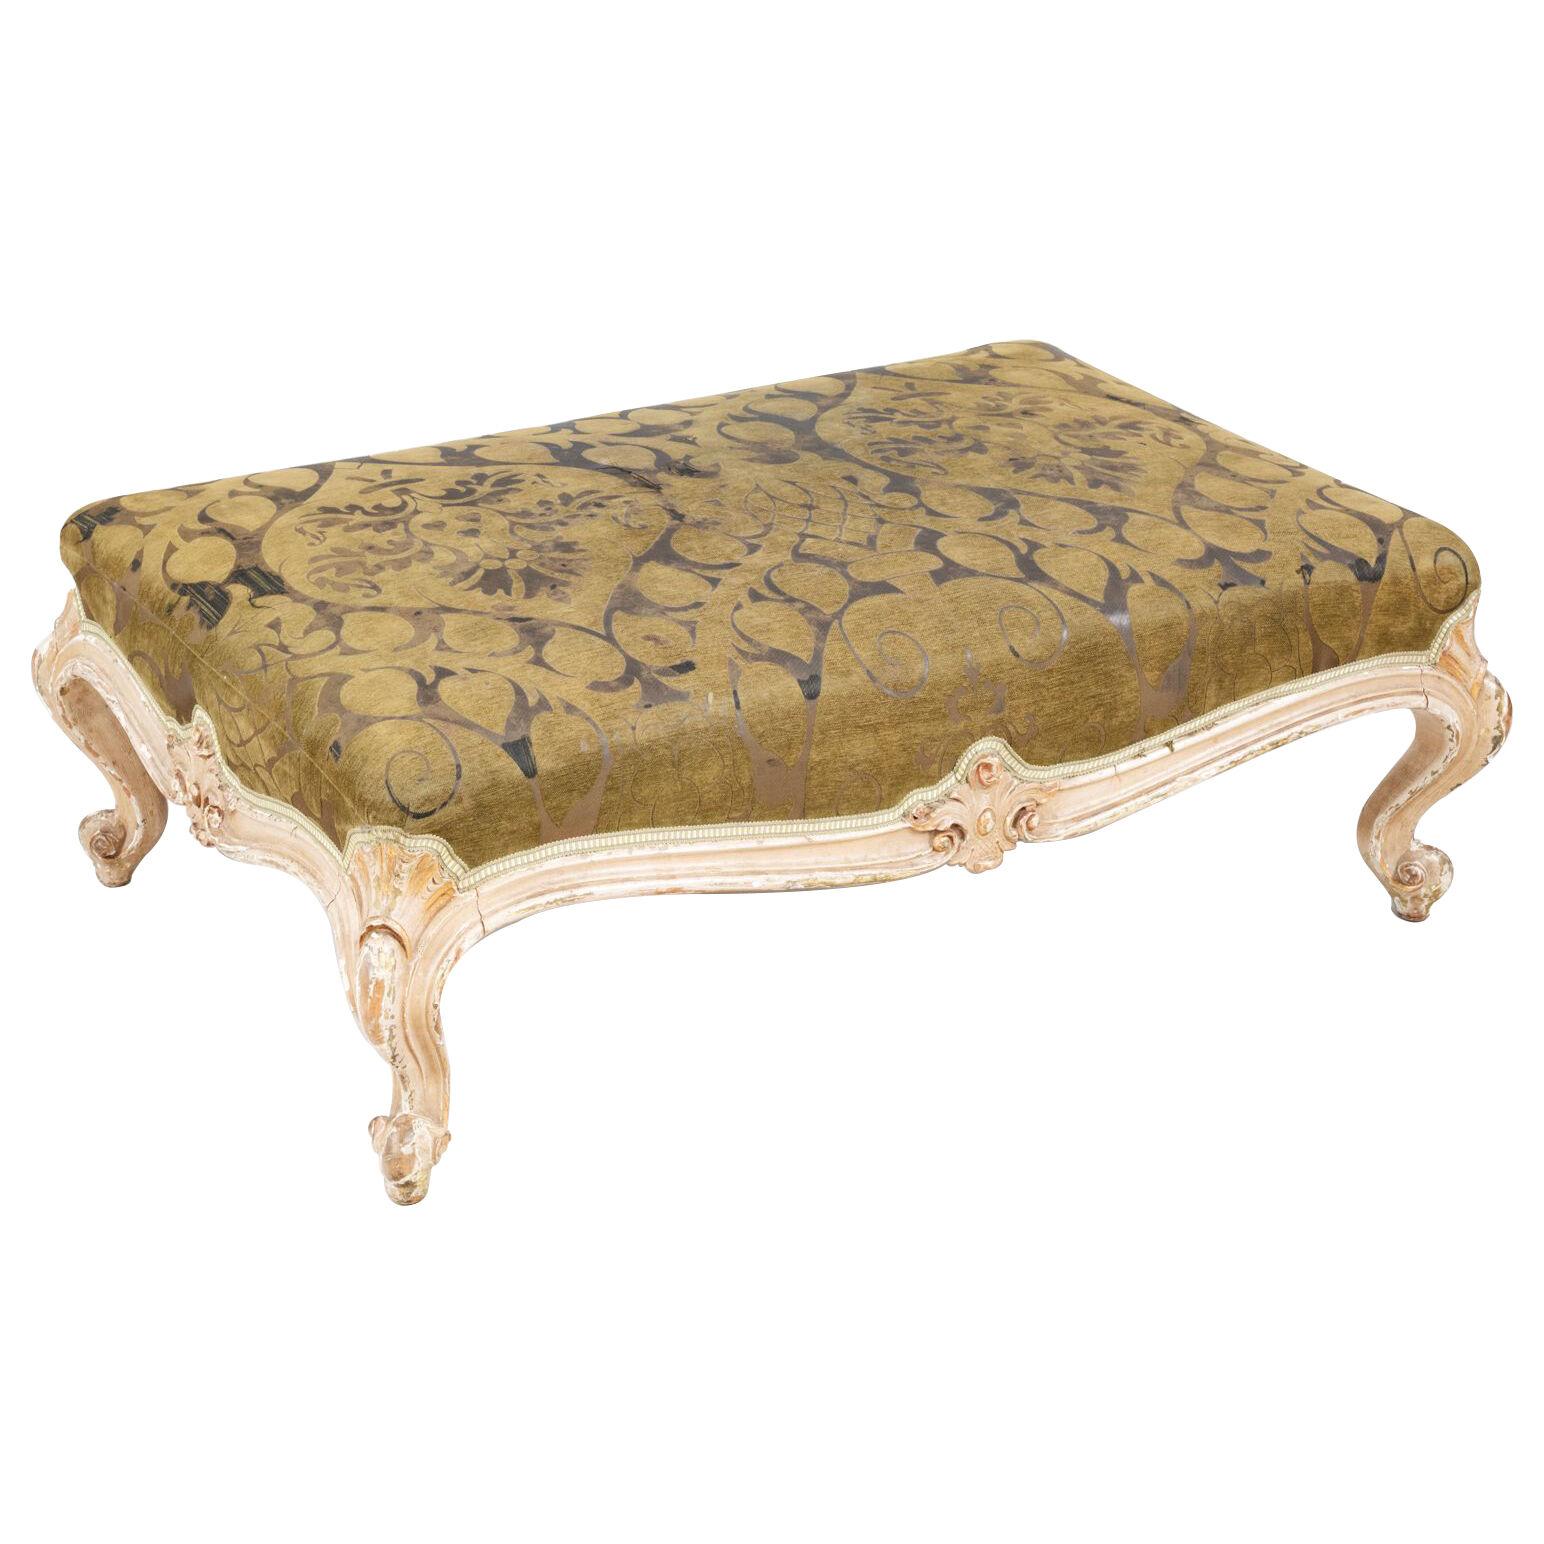 Late 18th Century Giltwood Central Ottoman